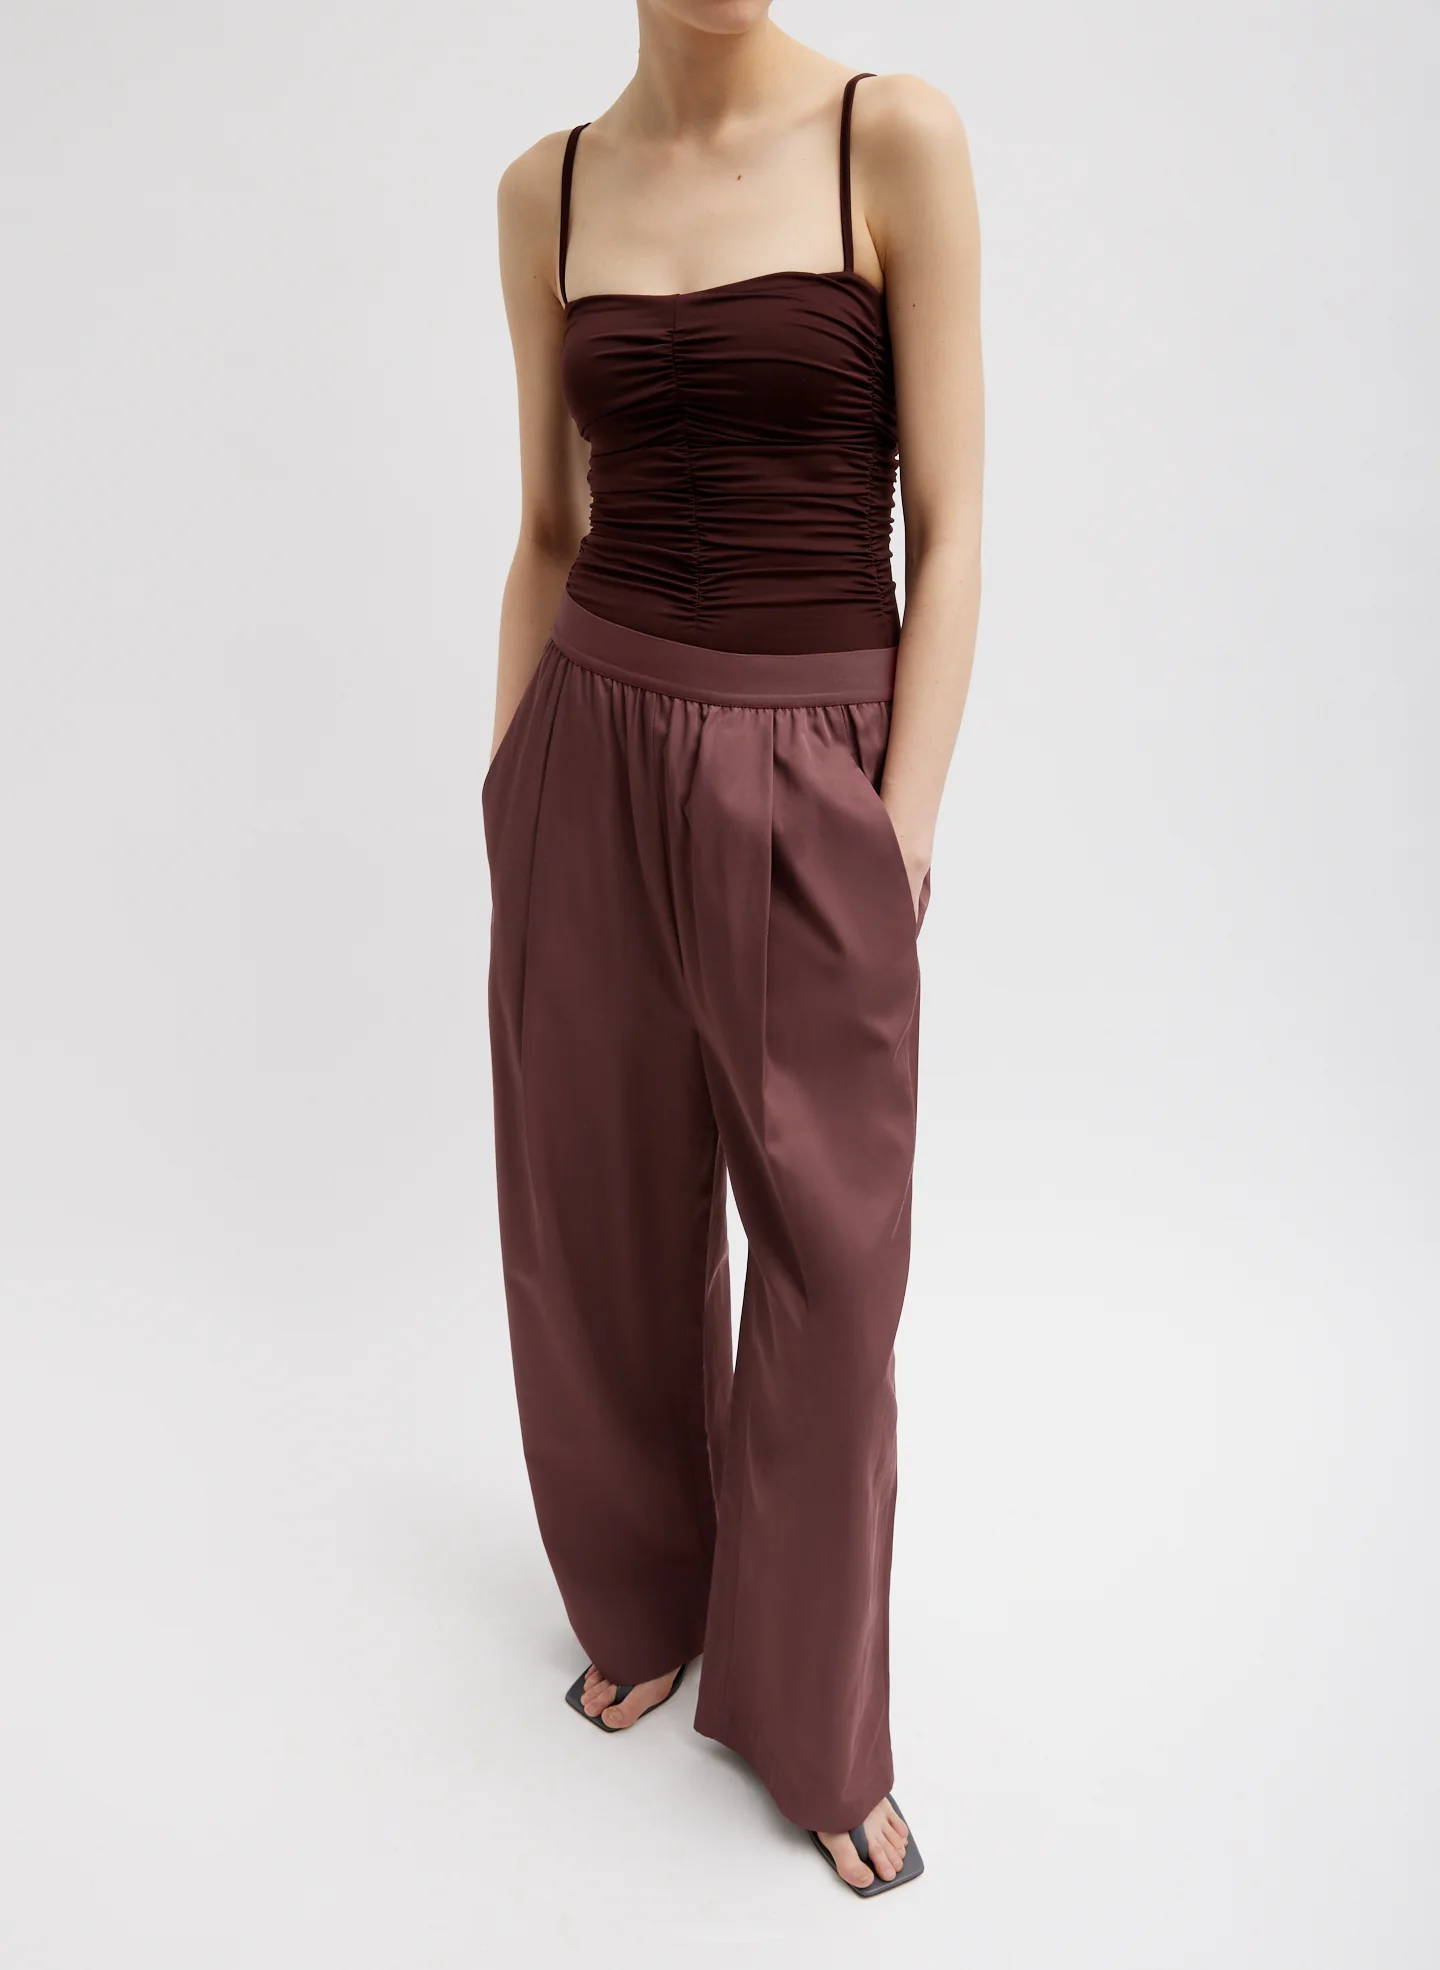 Drapey Suiting Marit Pull On Pant